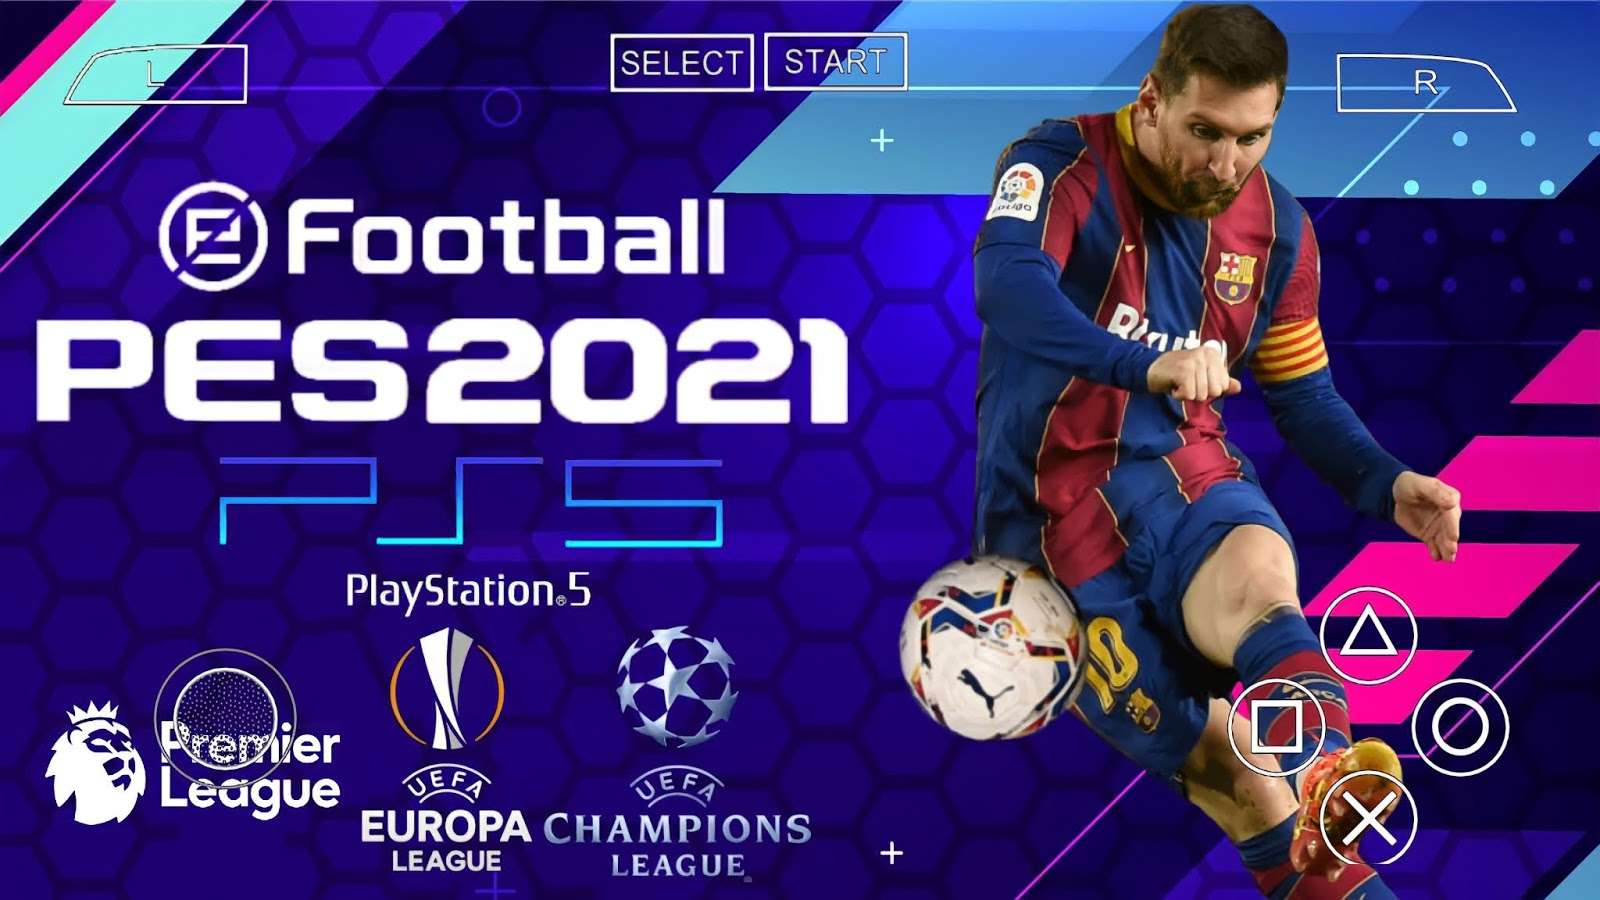 PES 2021 PPSSPP ANDROID UEFA CHAMPIONS EQUIPES EUROPEUS